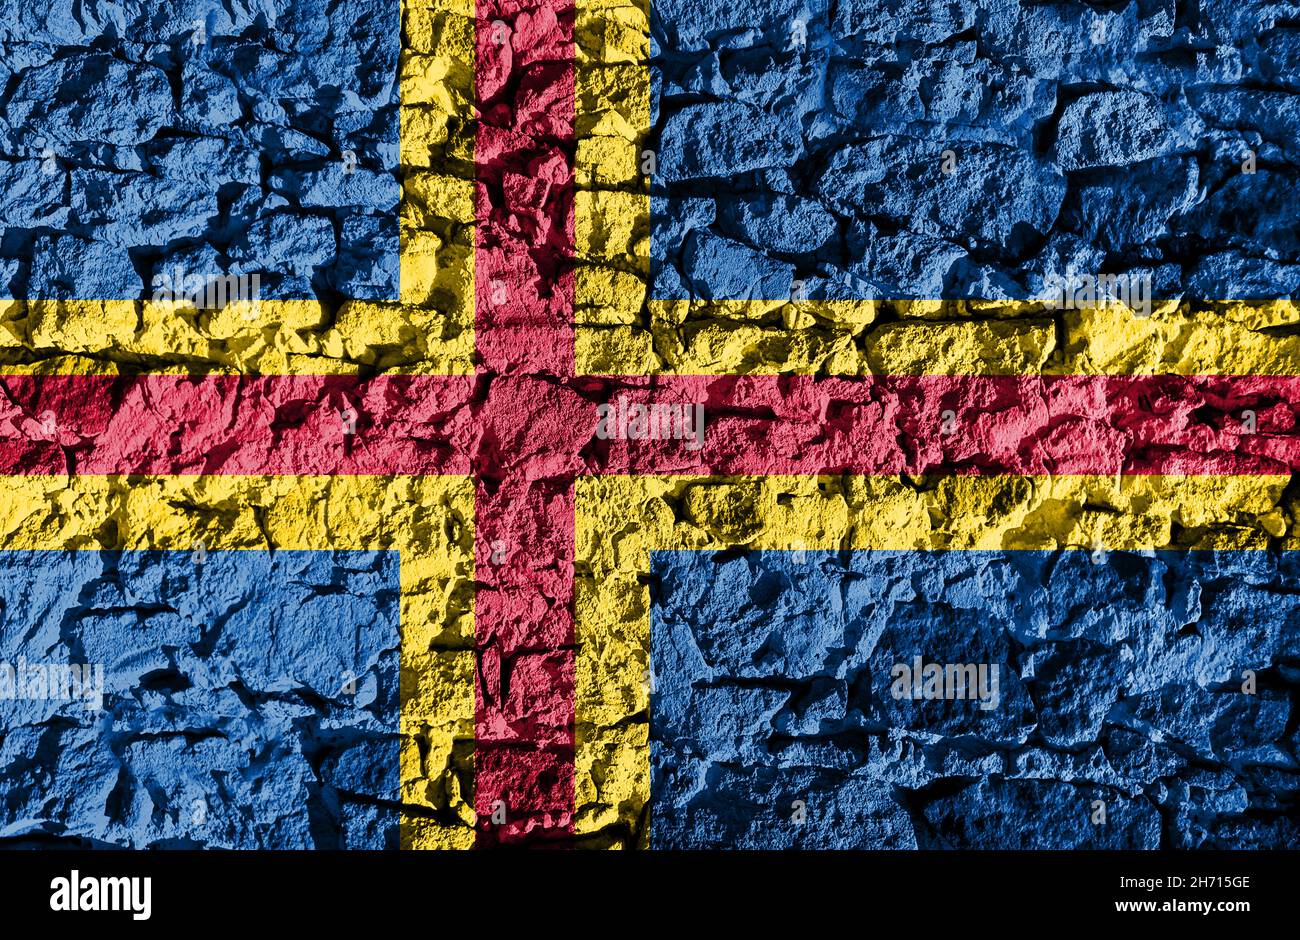 Aland Islands flag depicted on a stone wall. The texture of the stone blends perfectly with the colors of the banner Stock Photo